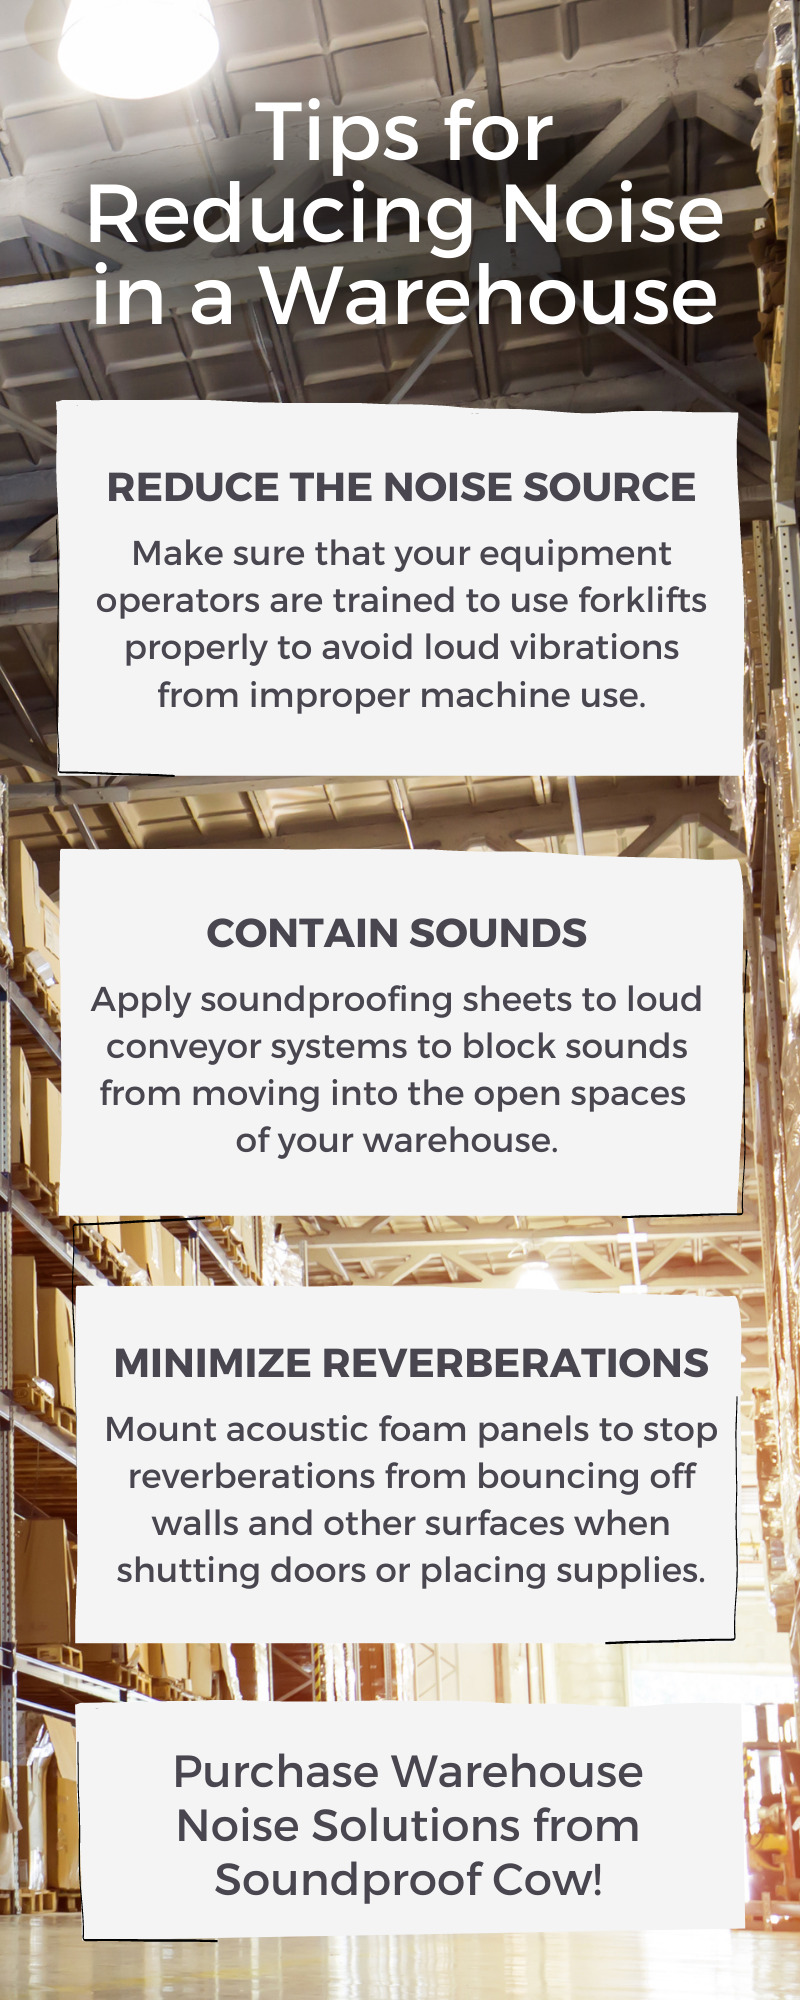 Tips for reducing warehouse noise